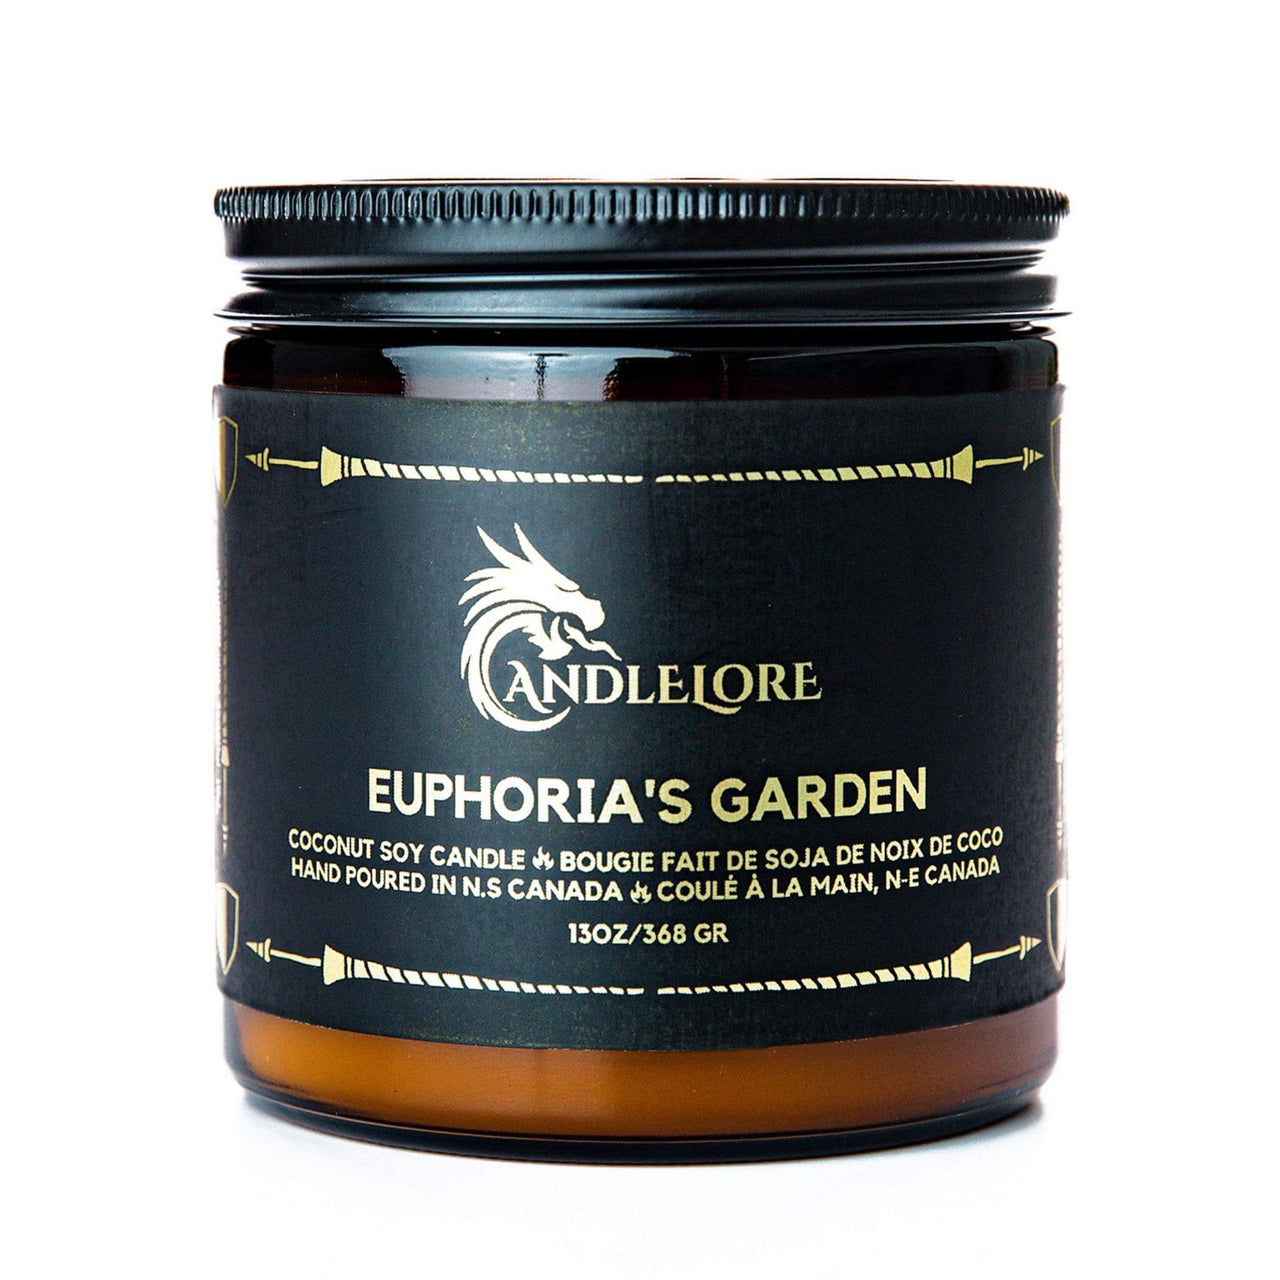 Large Euphoria's Garden scented candle on a white background